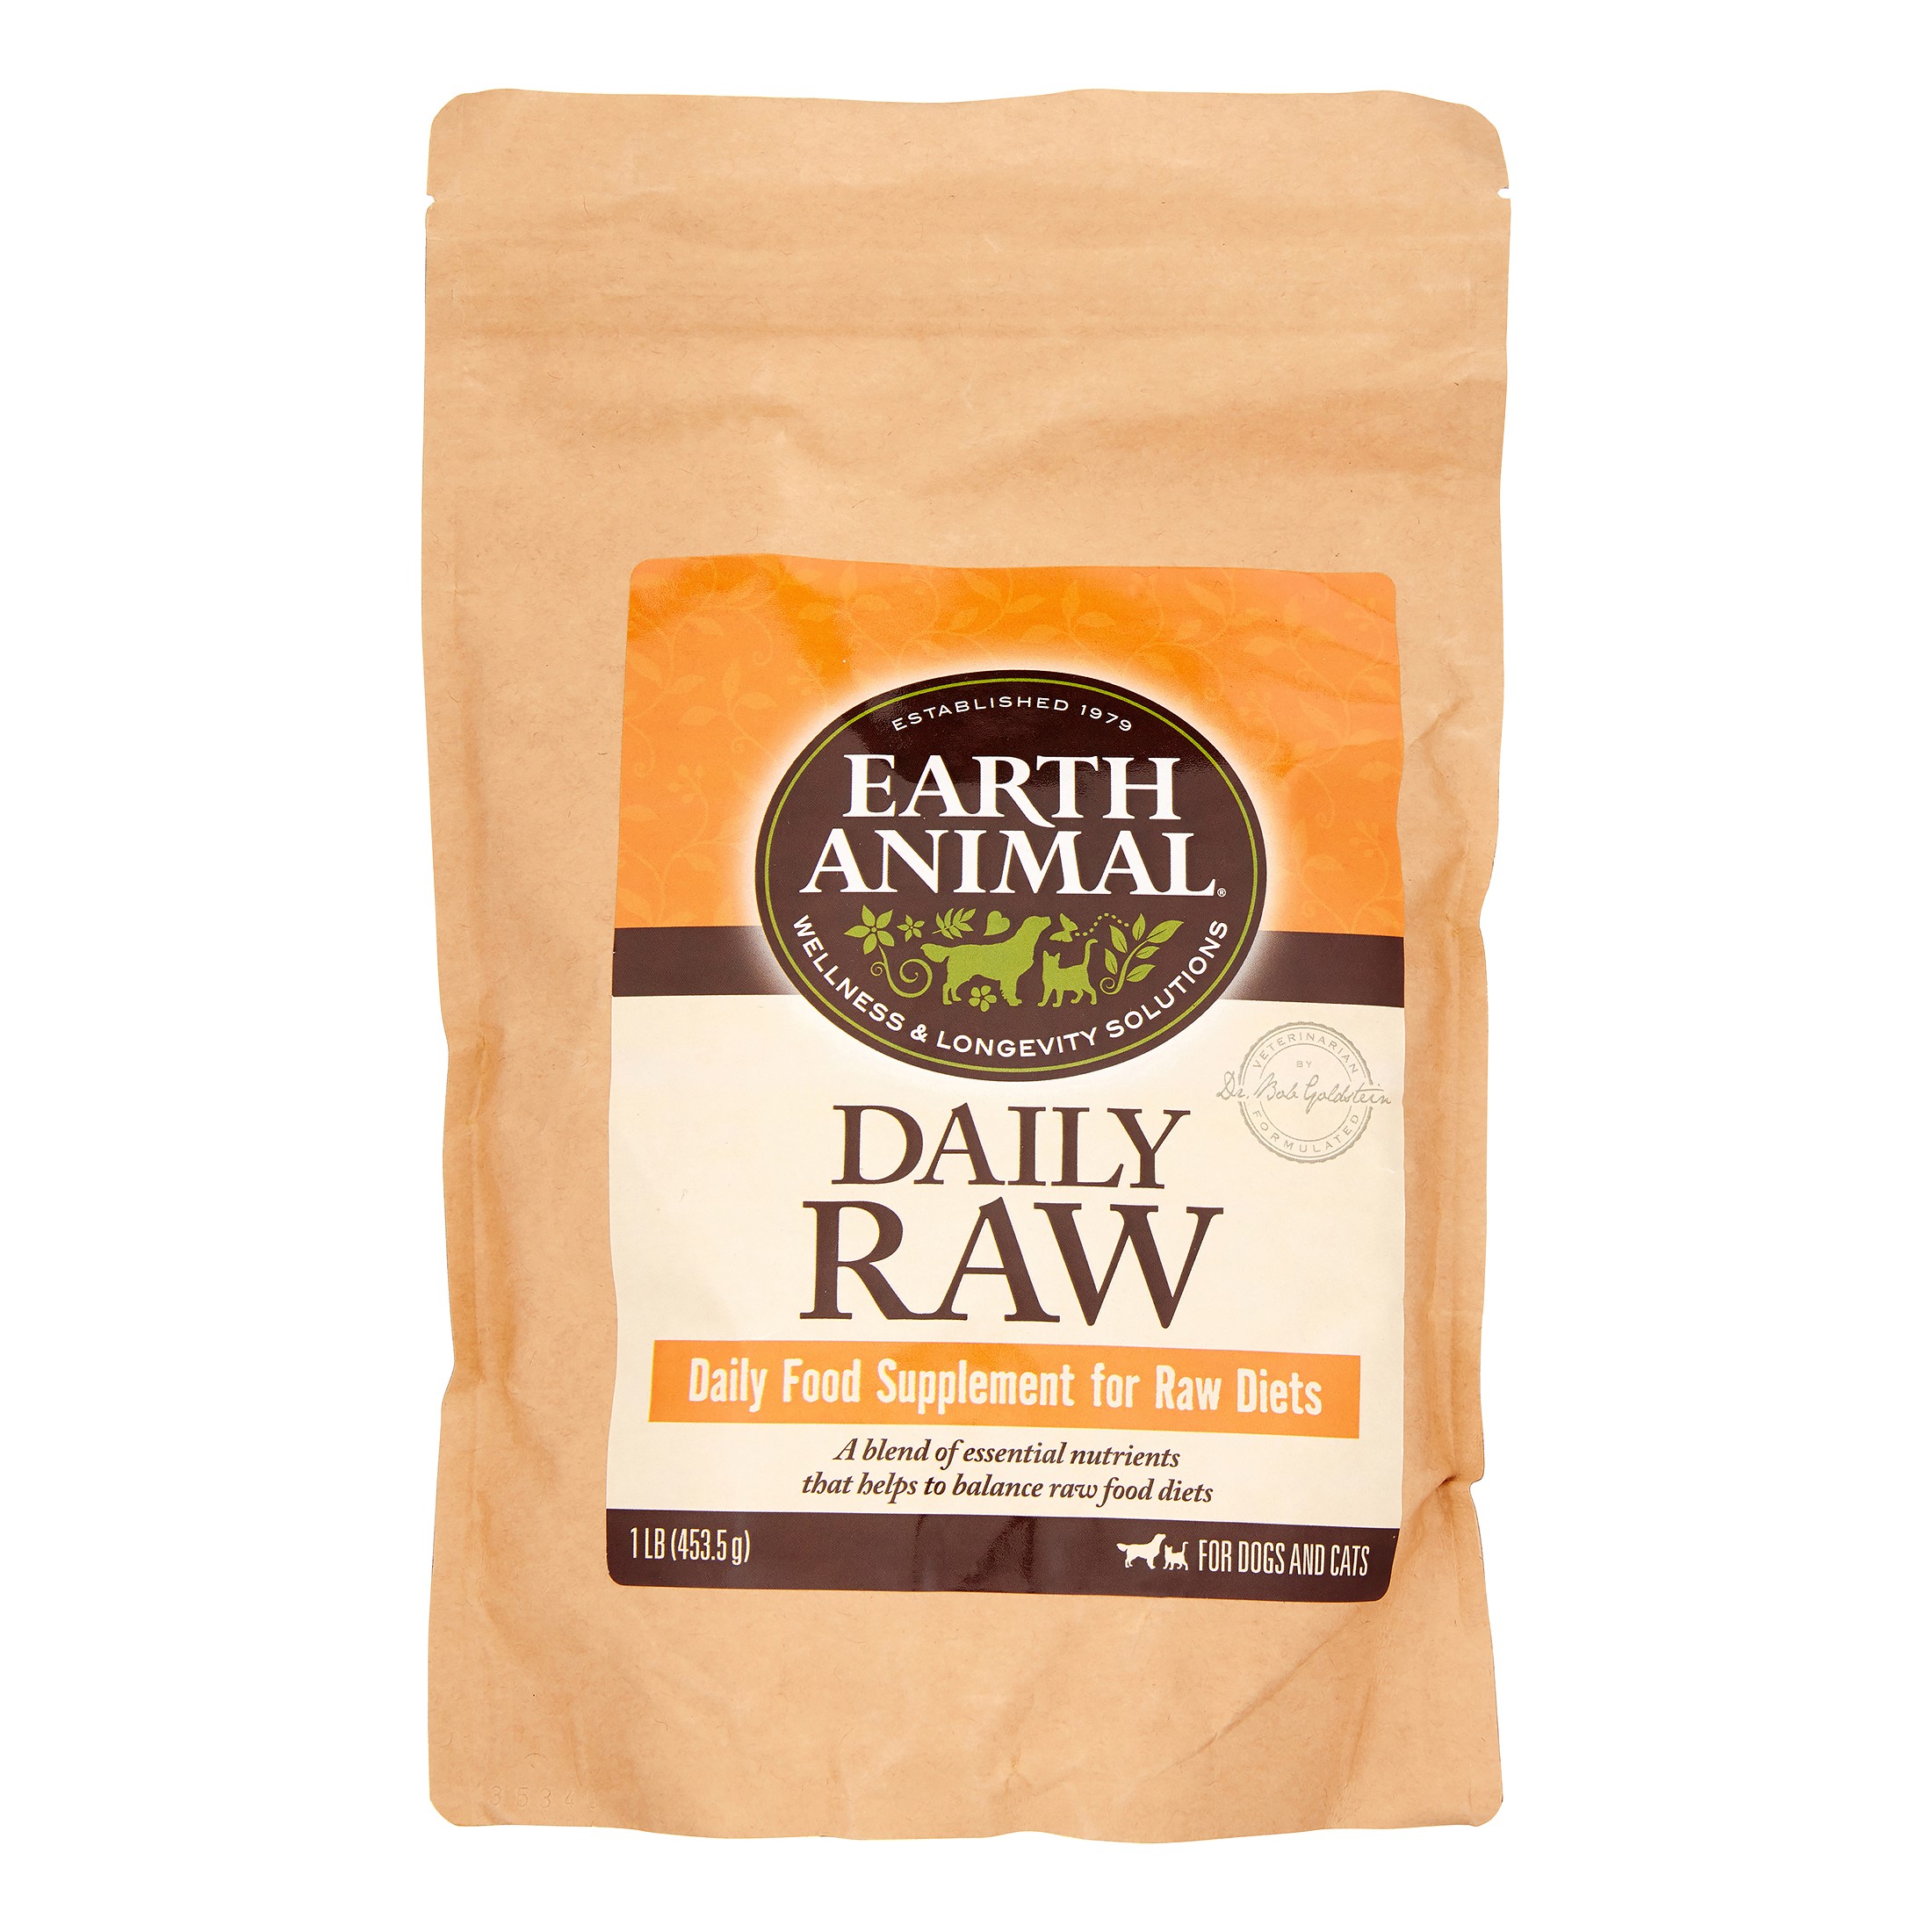 Earth Animal Daily Raw Complete Powder Dog & Cat Supplement, 1 Lb - image 1 of 3